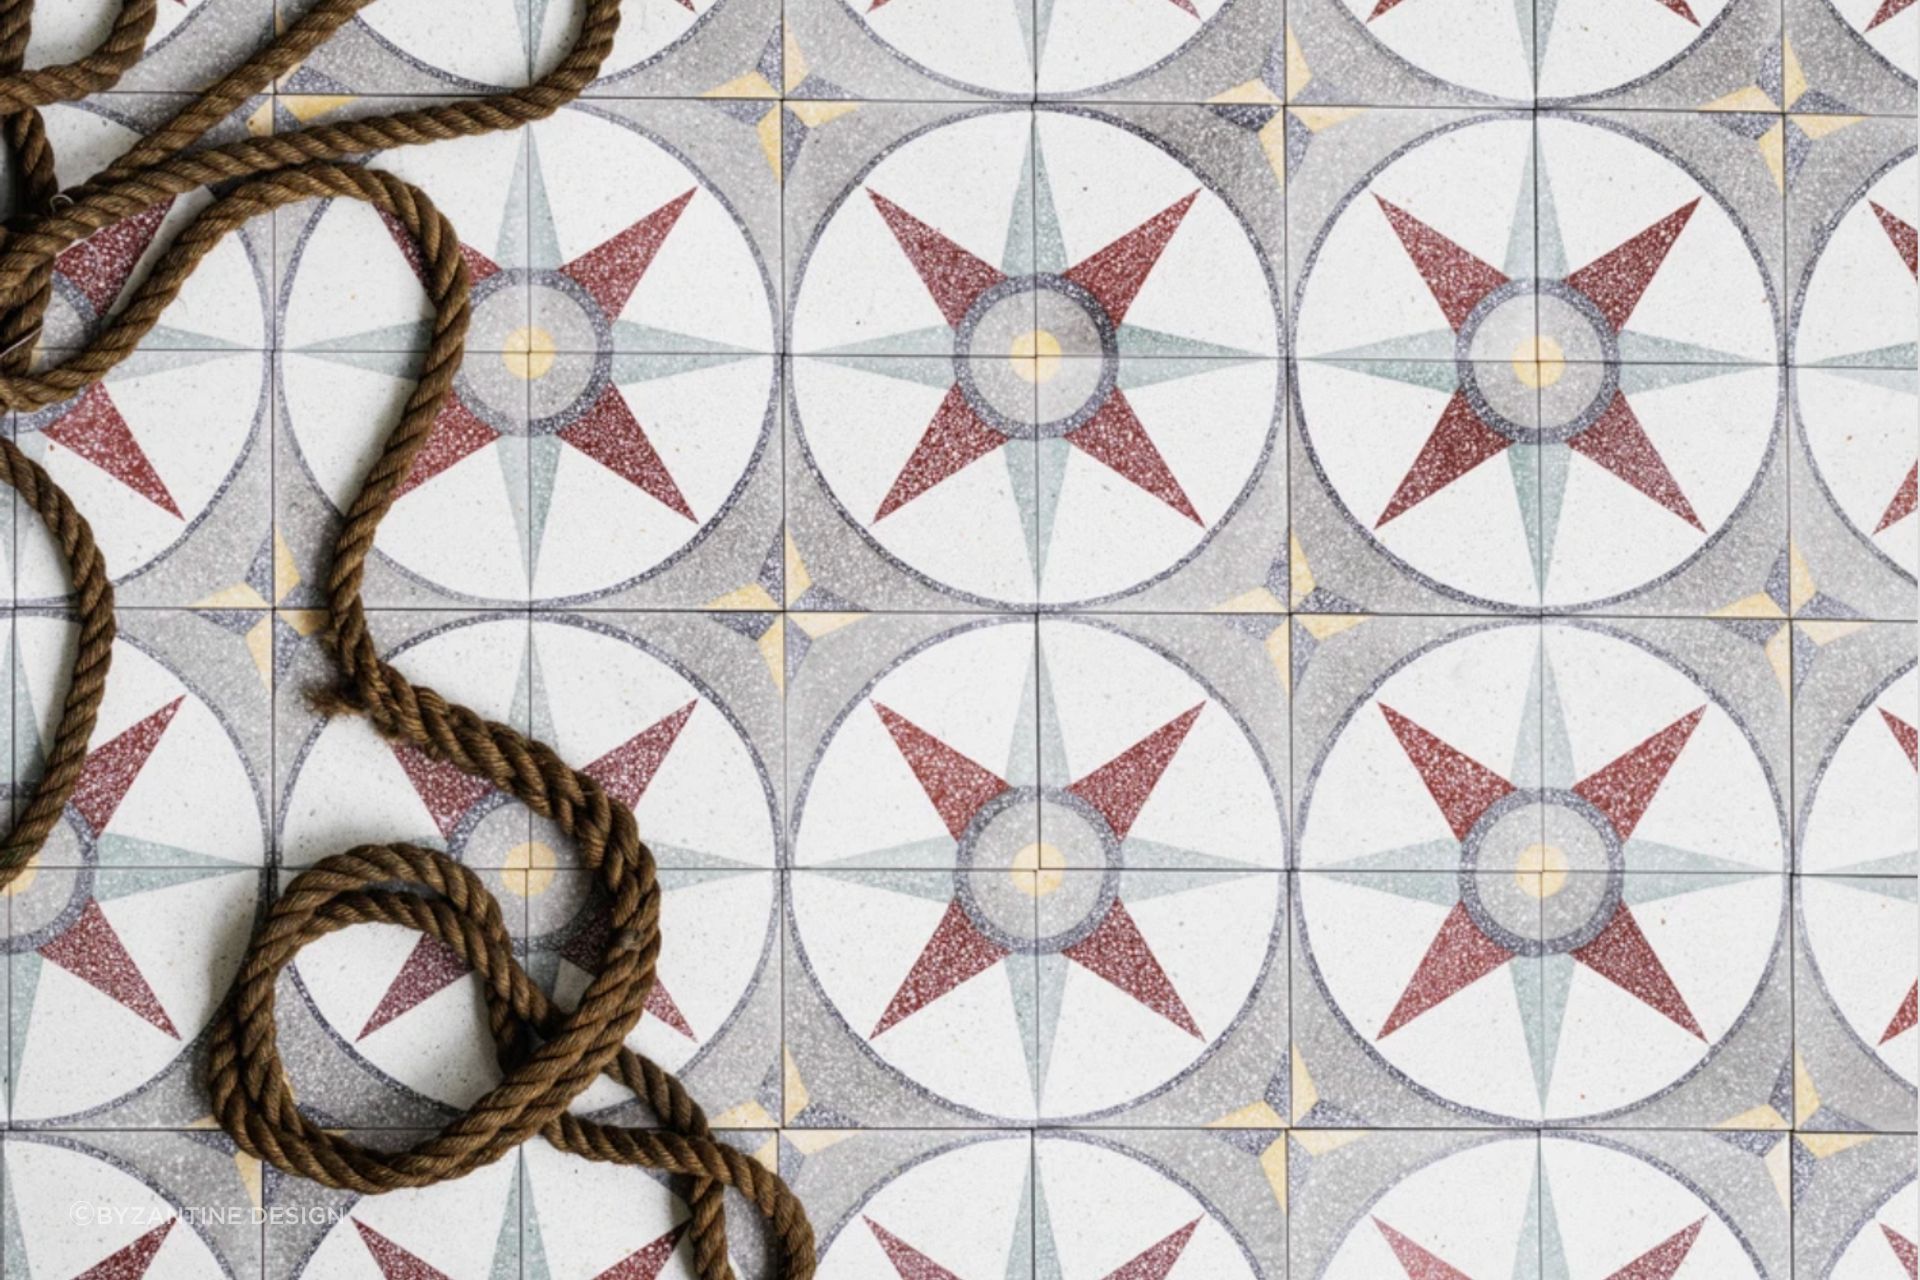 Encaustic tiles bring exquisite patterns to different applications.